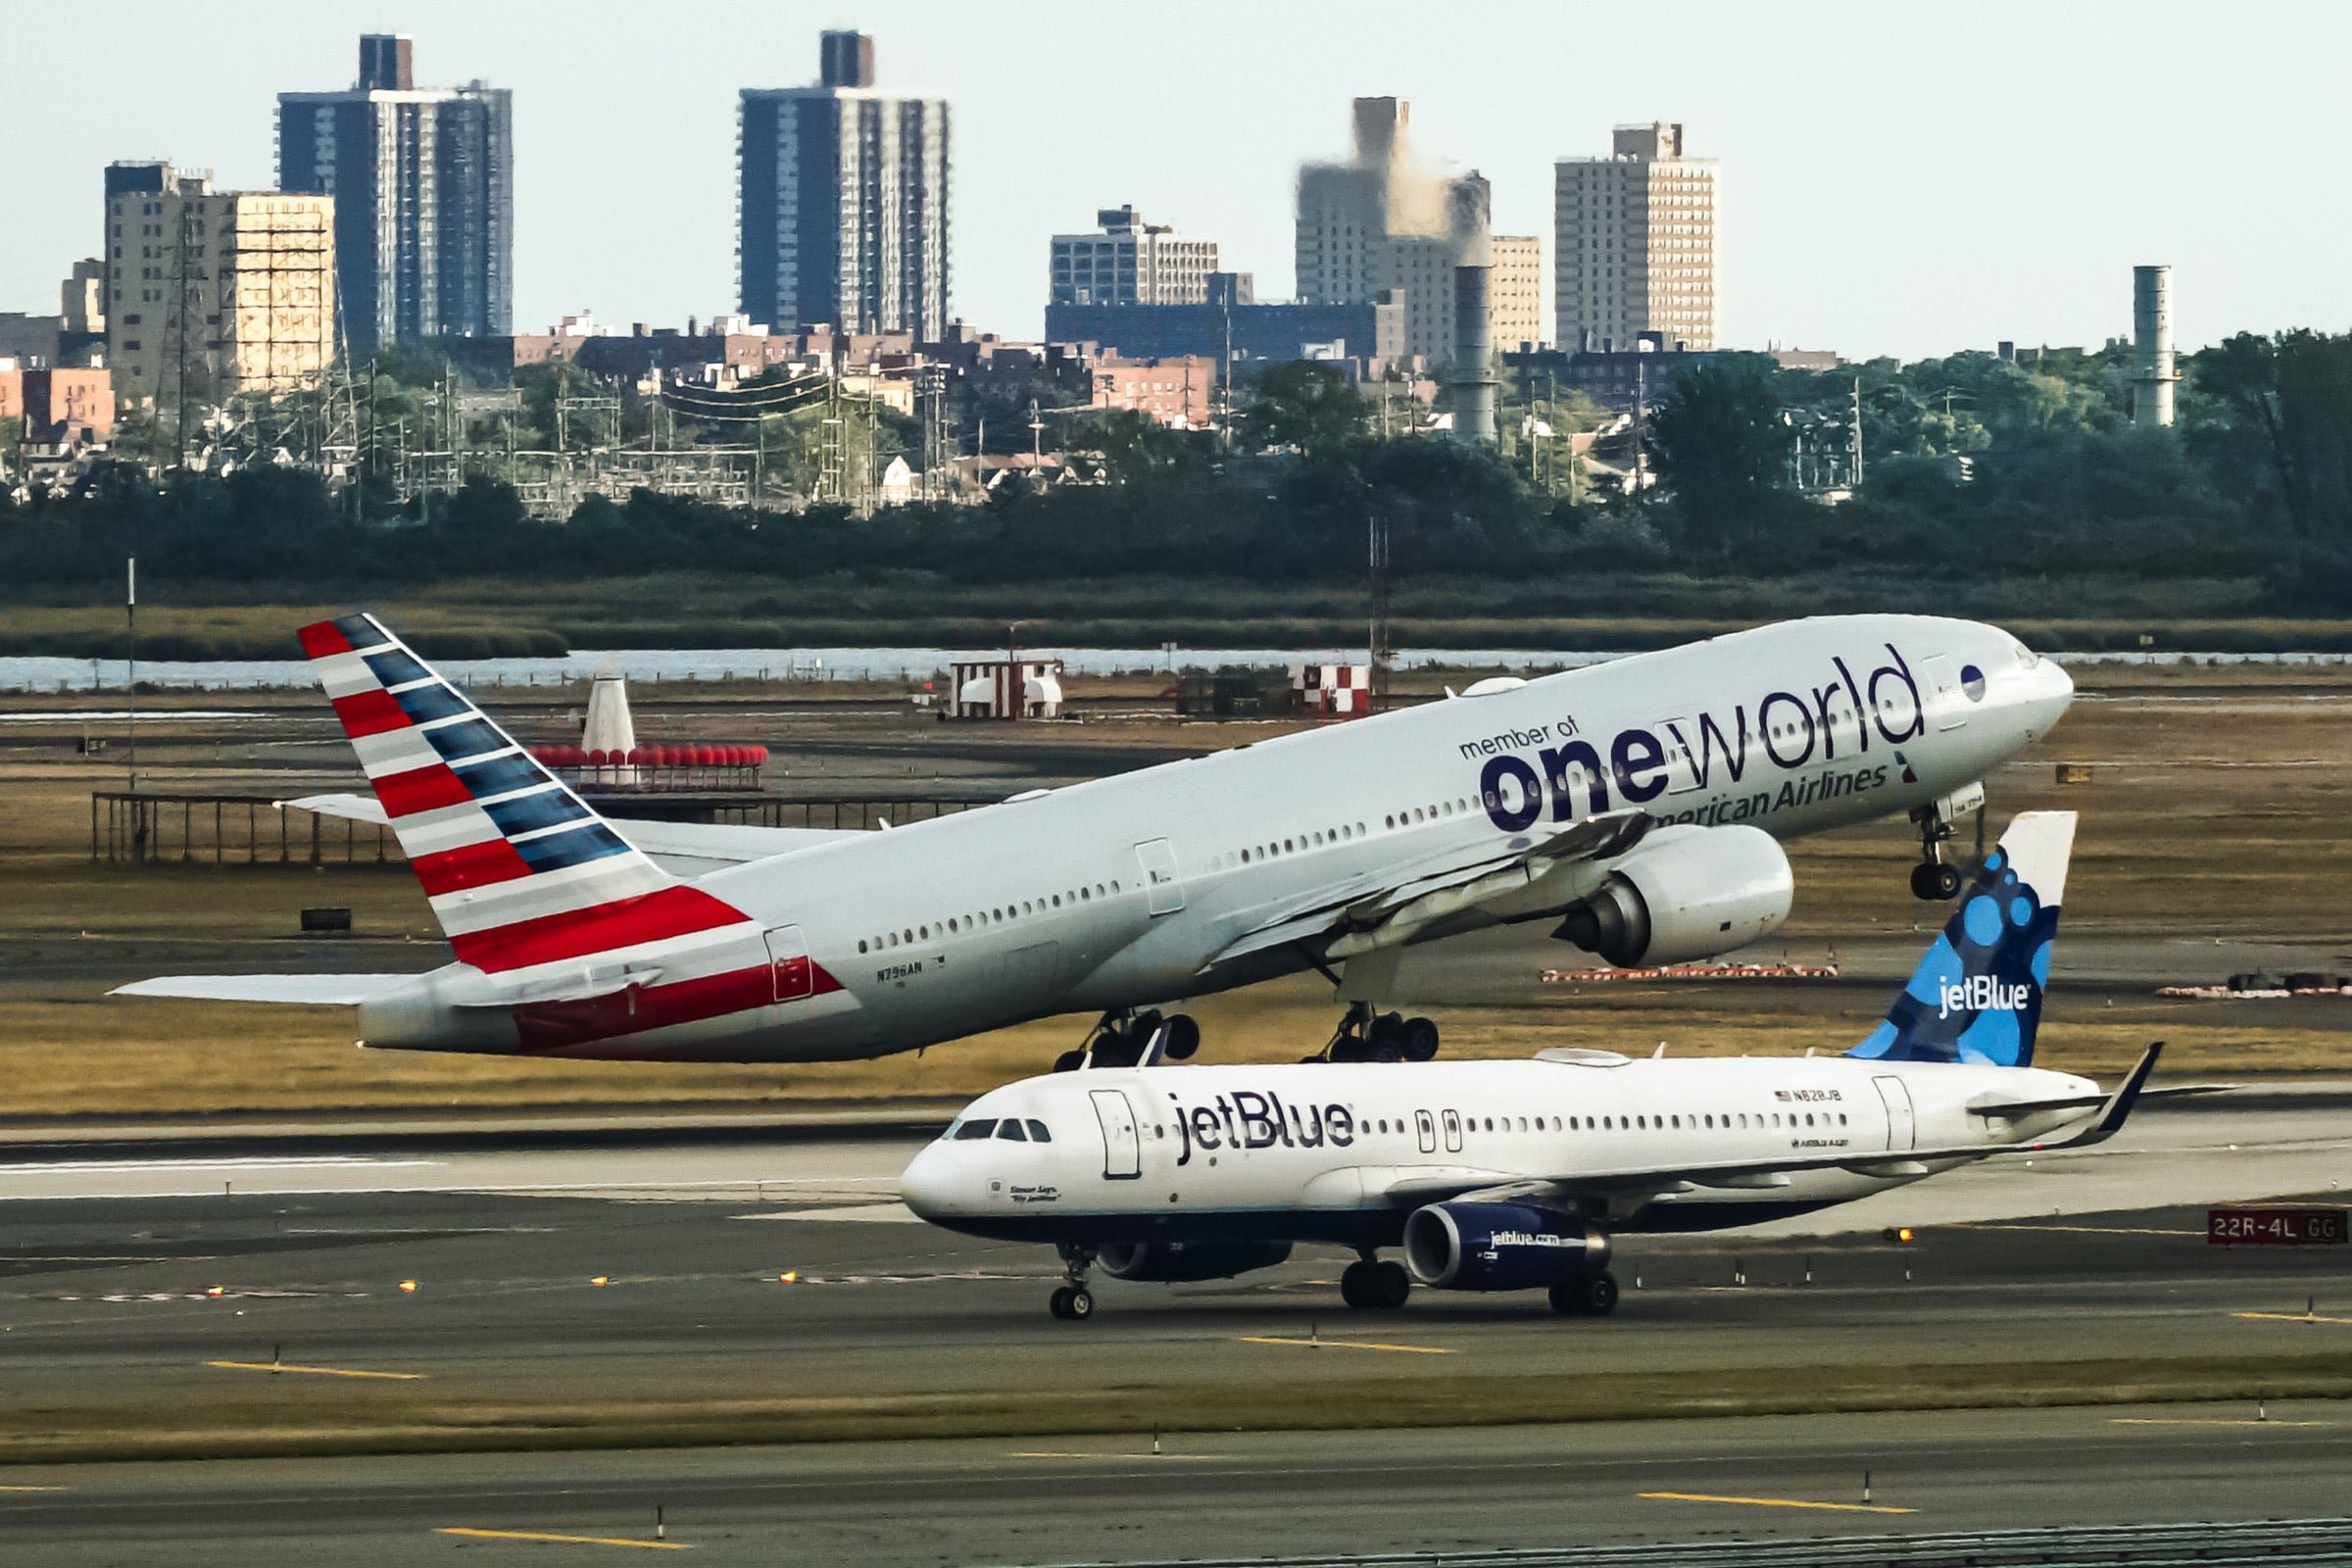 American plane in Oneworld livery and JetBlue plane at JFK airport